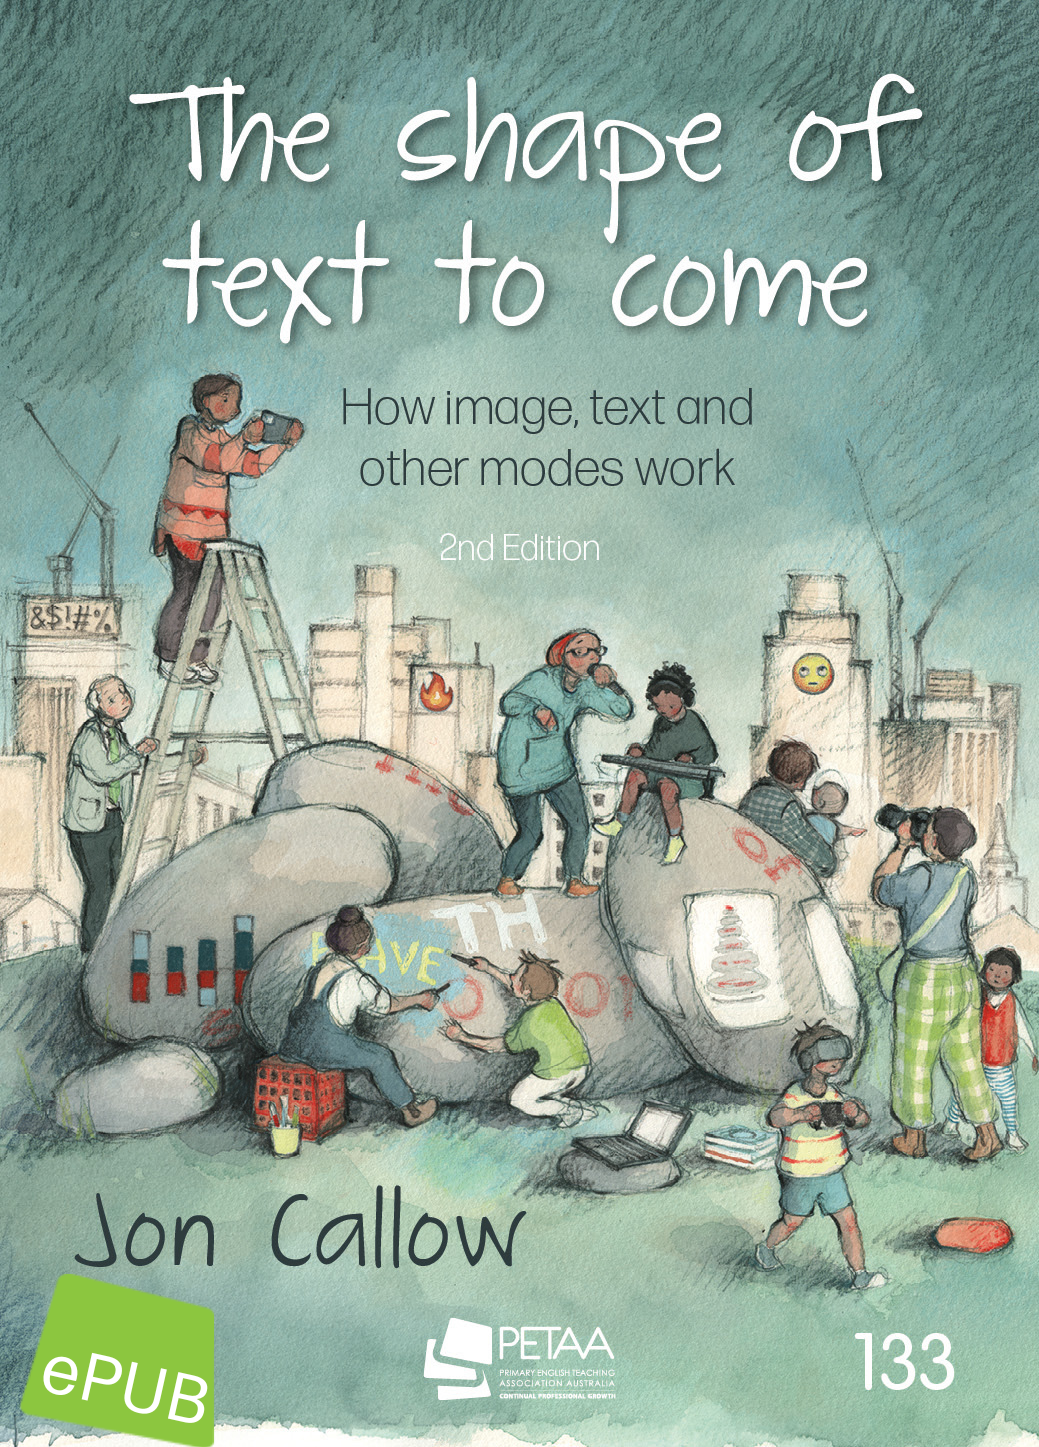 eBook - The shape of text to come (2nd edition)